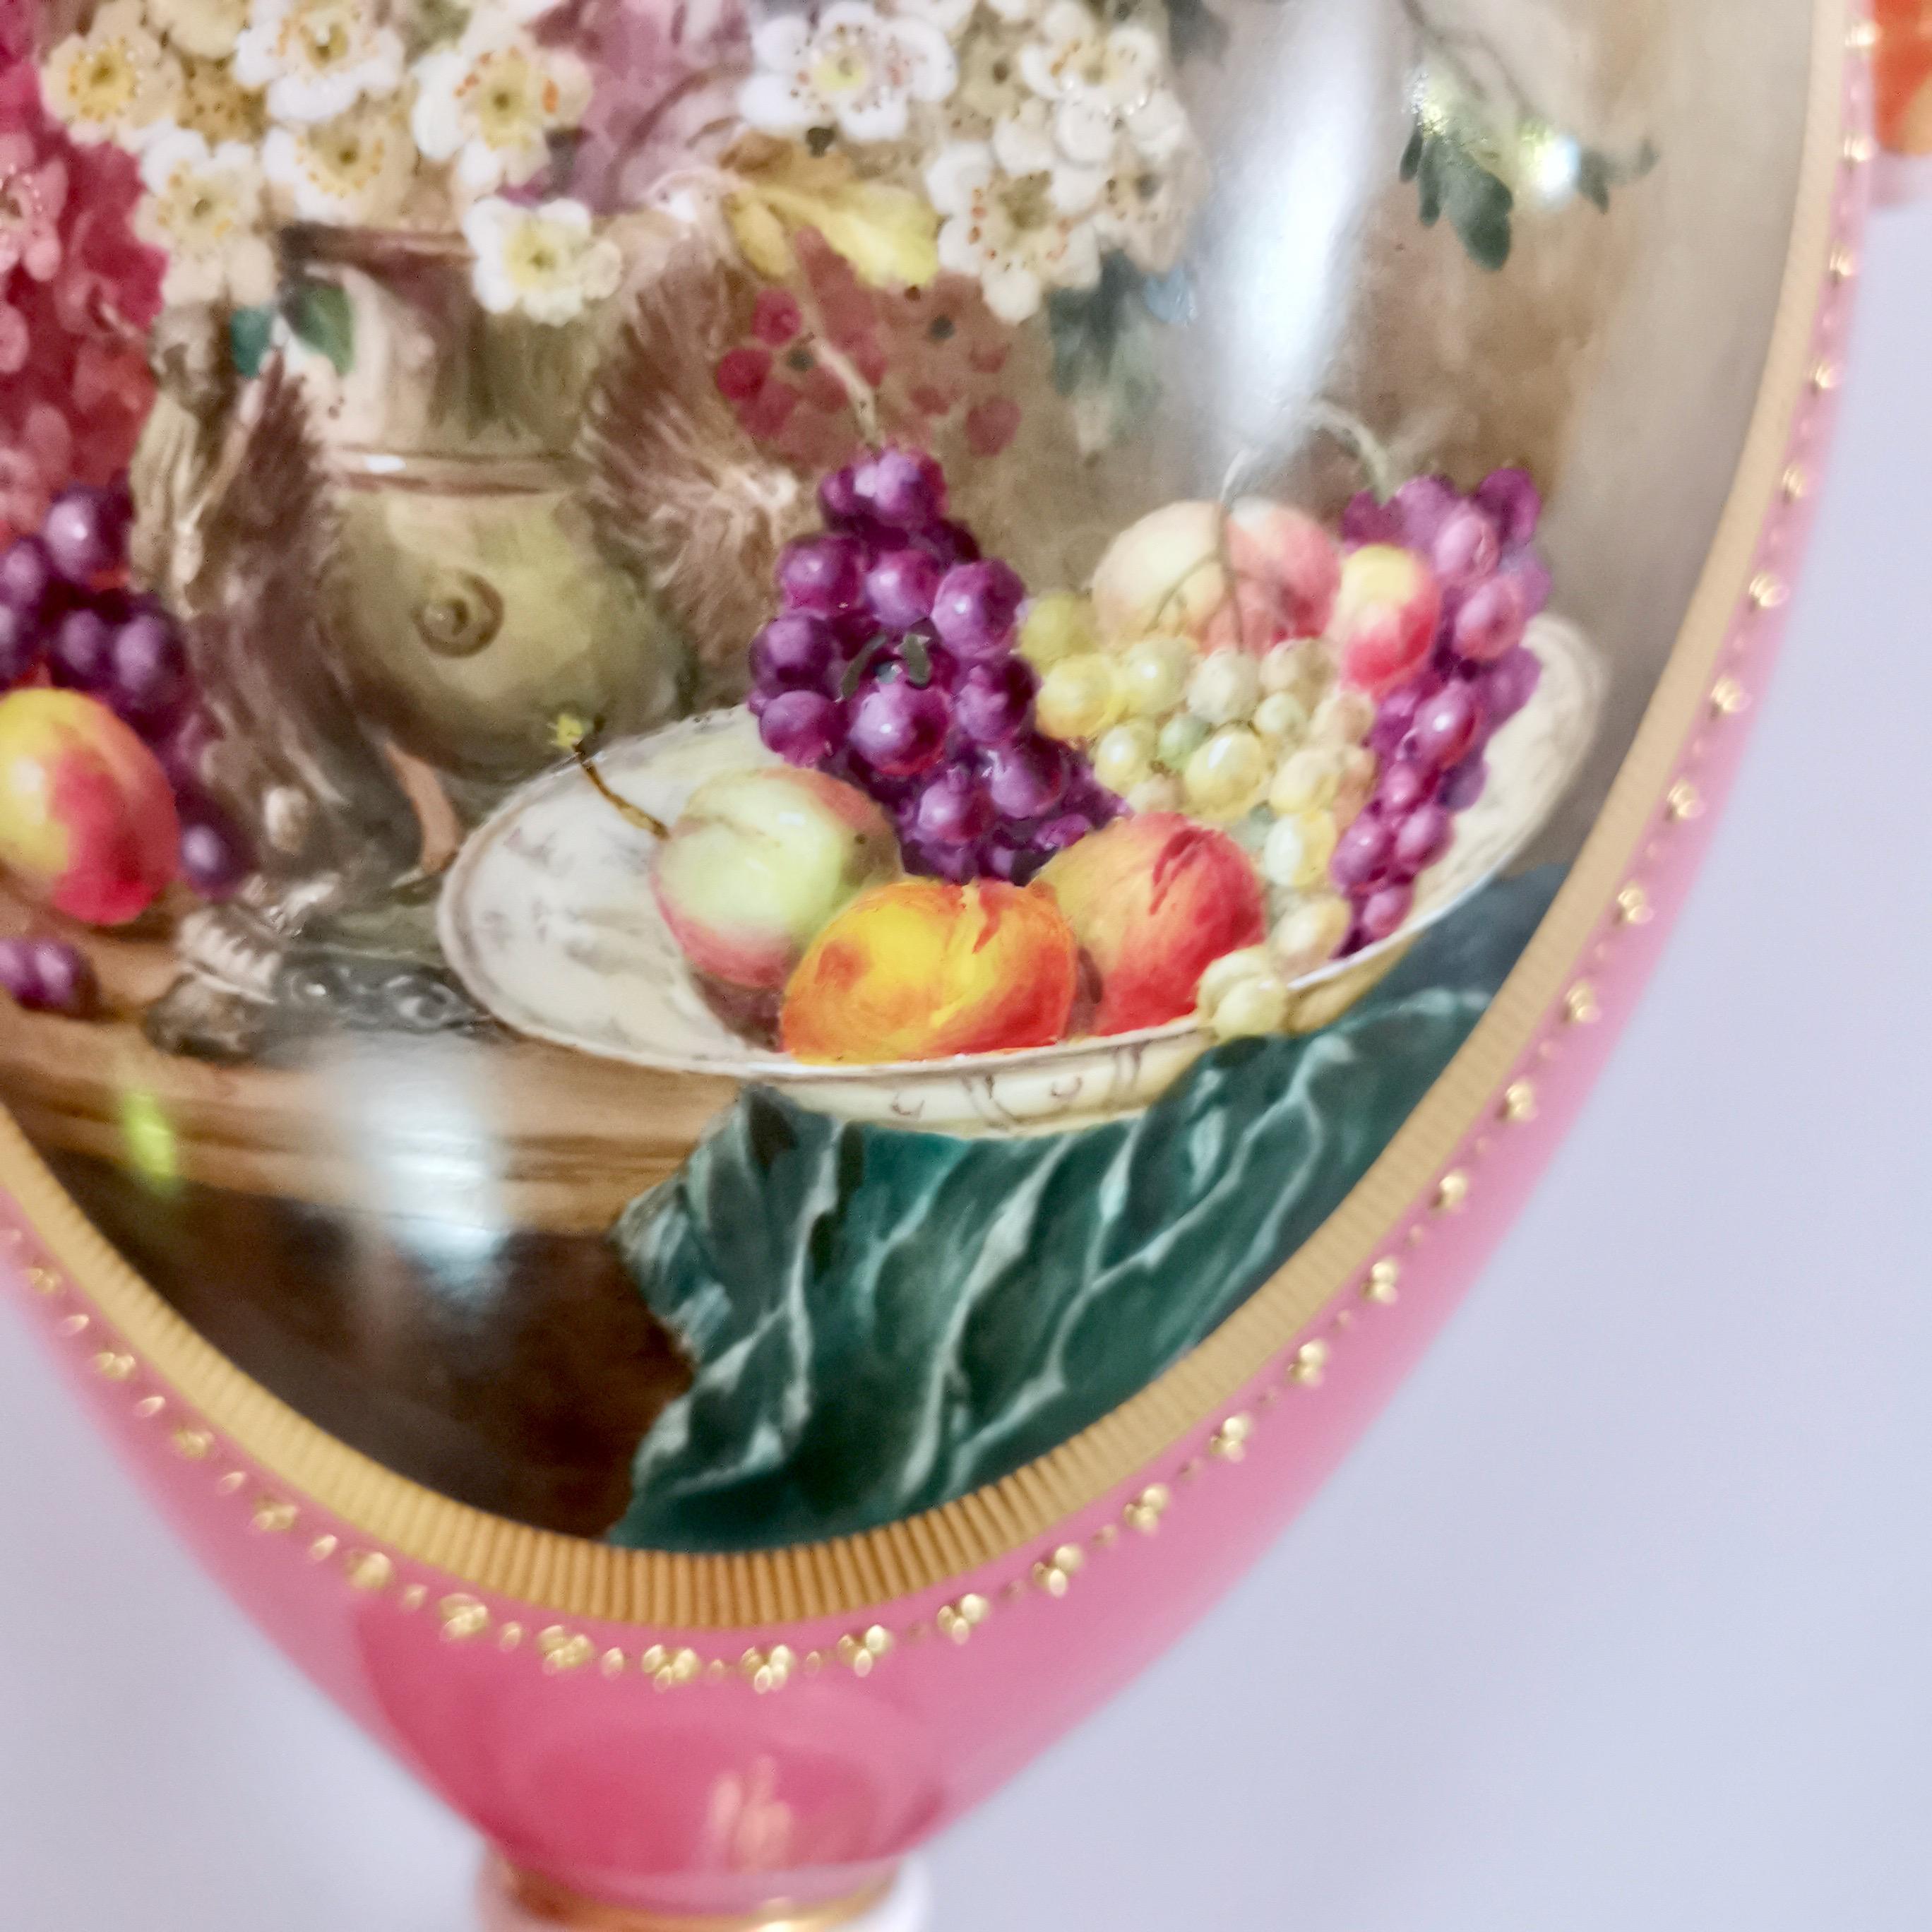 Edwardian Royal Worcester Vase, Pink with Flowers and Fruits, Signed William Hawkins, 1917